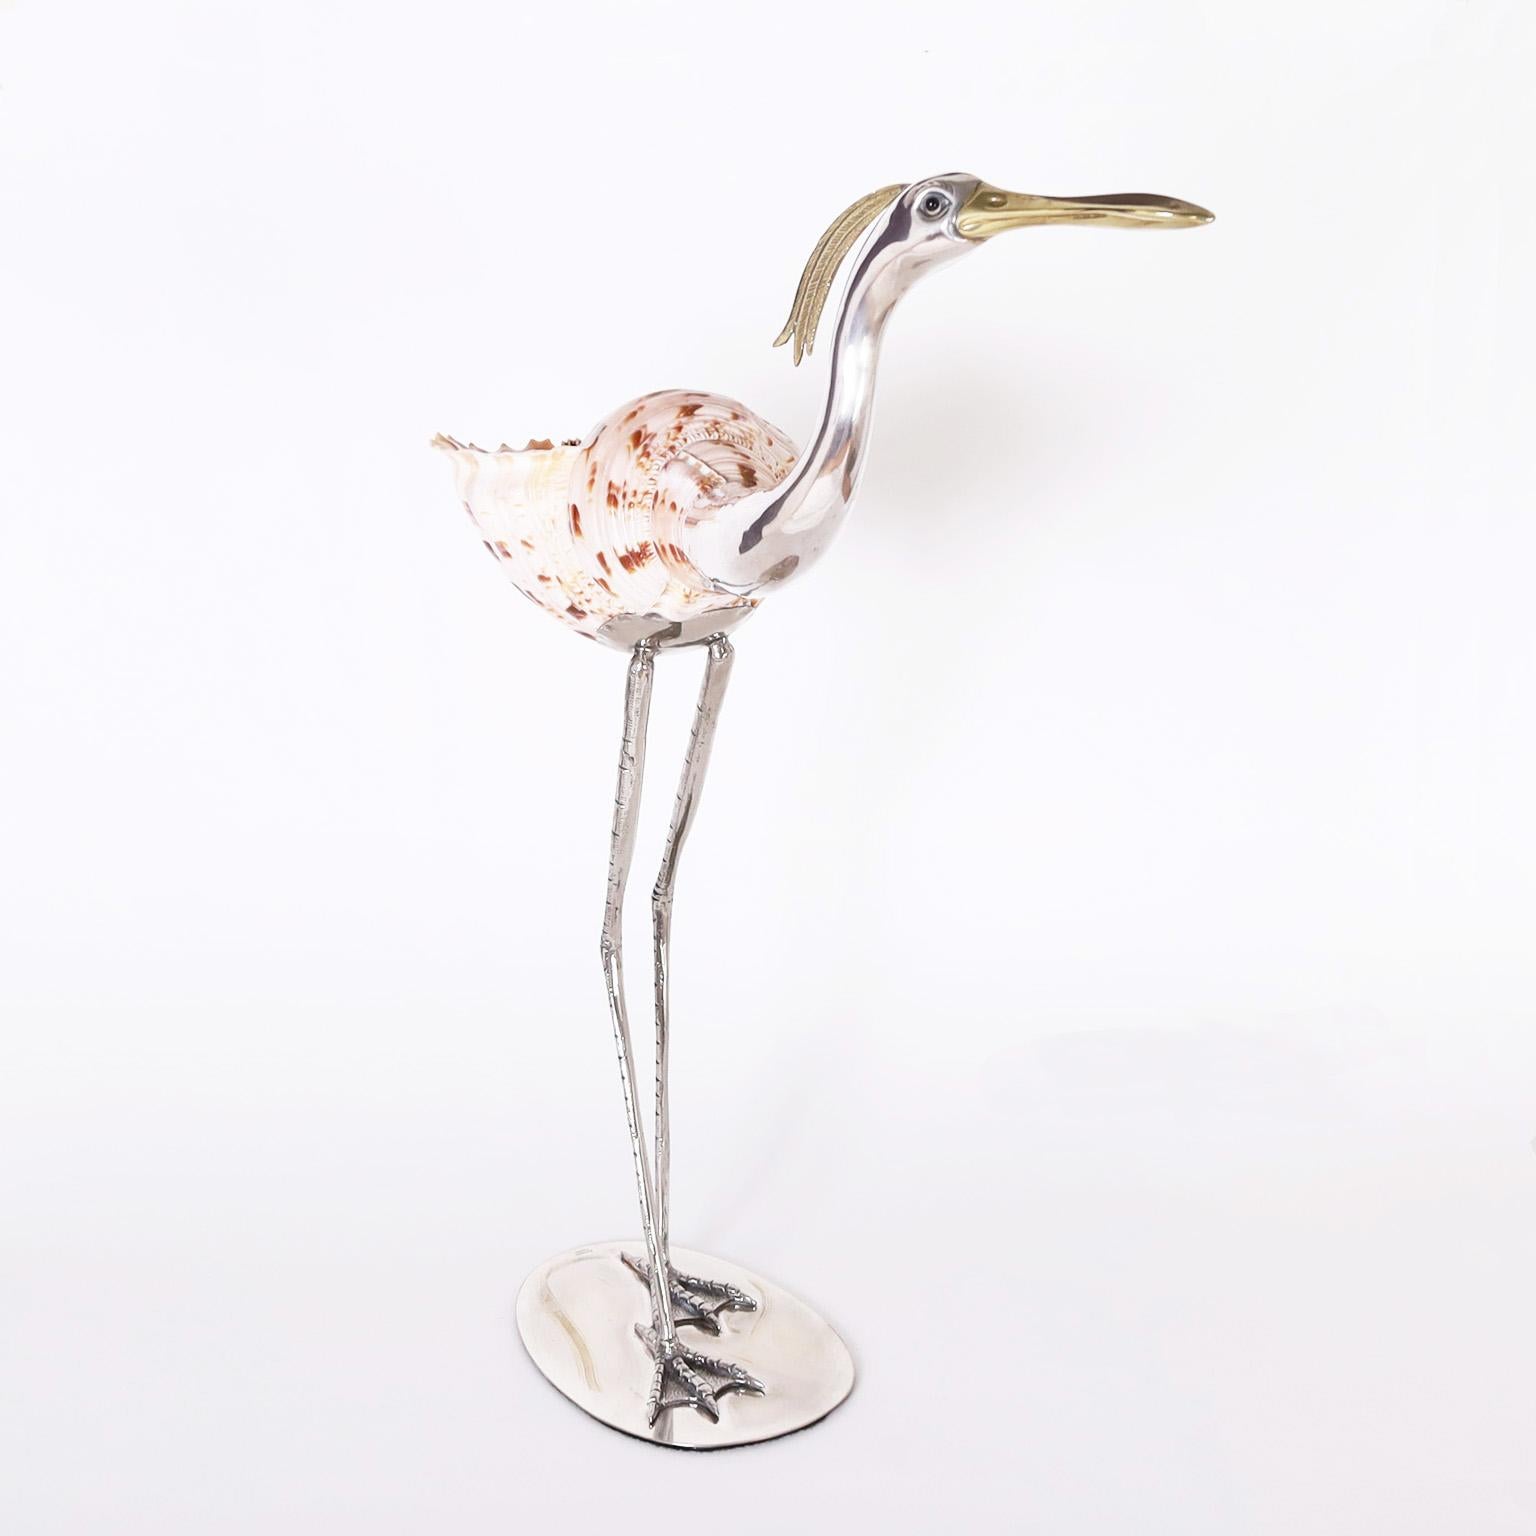 Mid century bird or stork sculpture crafted with silvered metal, brass, and an organic conch shell in a familiar pose. Stamped Binazzi Firenze on the base.